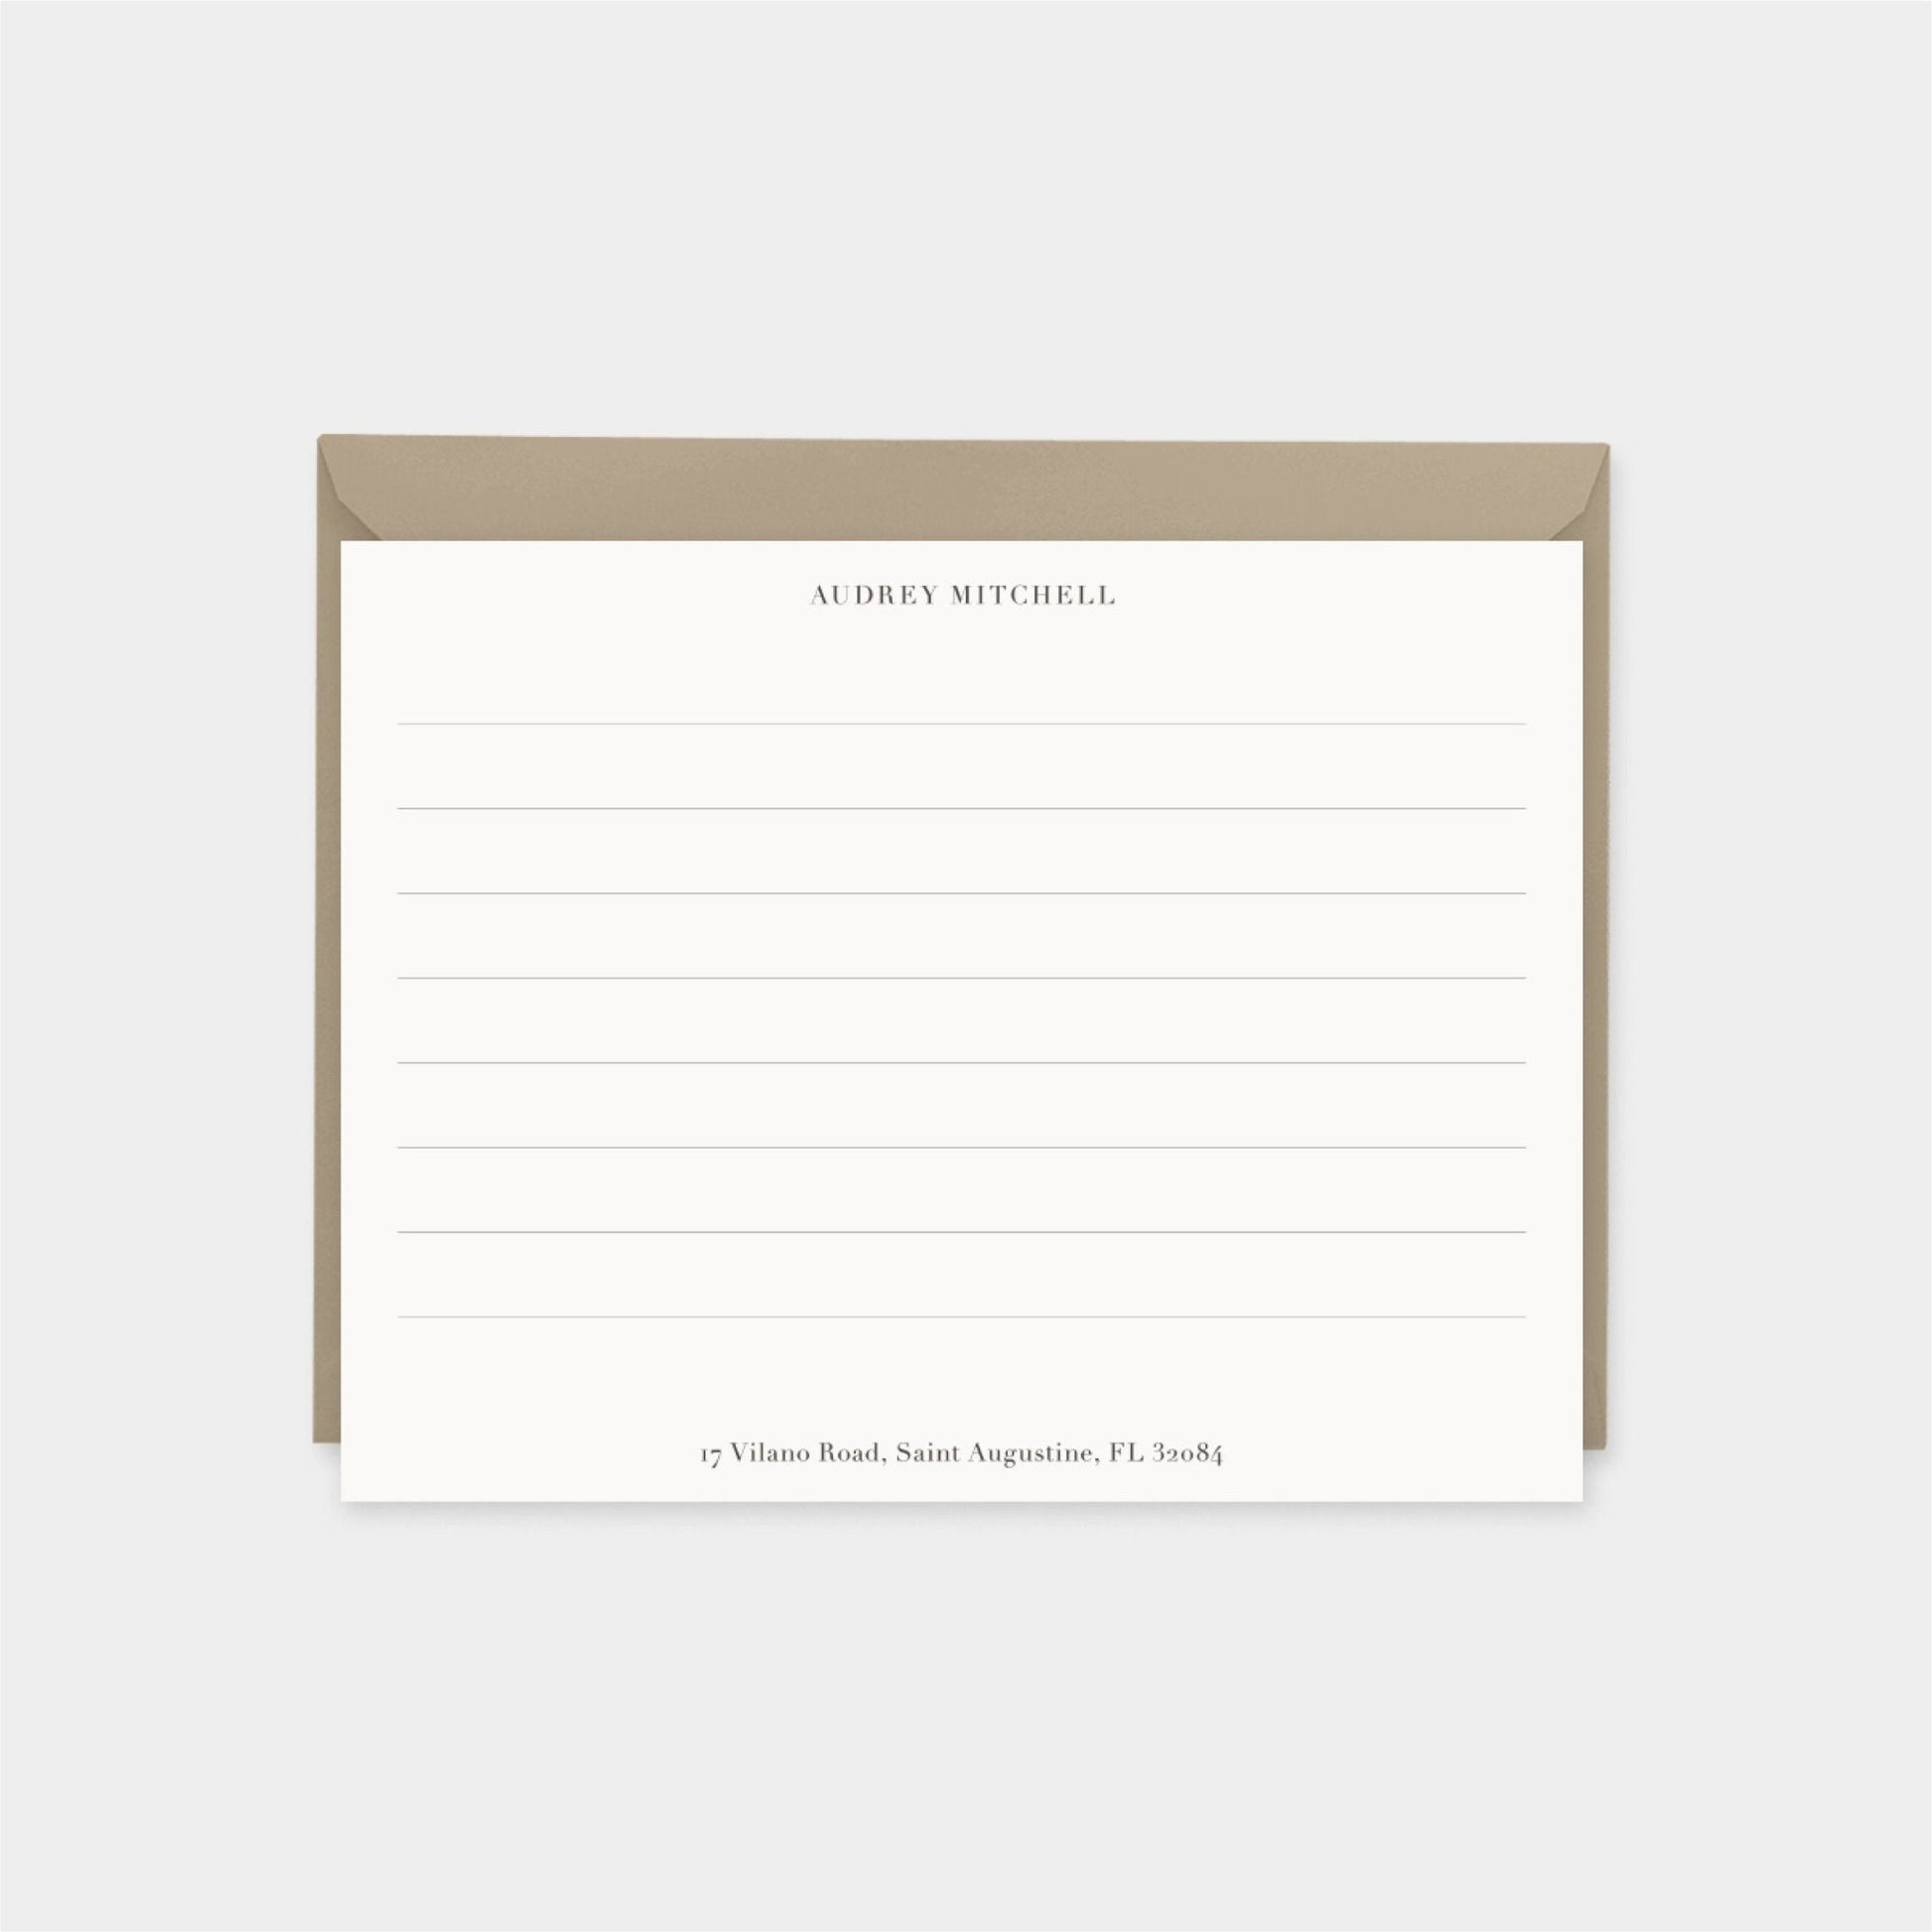 Green Ink Splot Texture Note Cards,-Greeting & Note Cards-The Design Craft